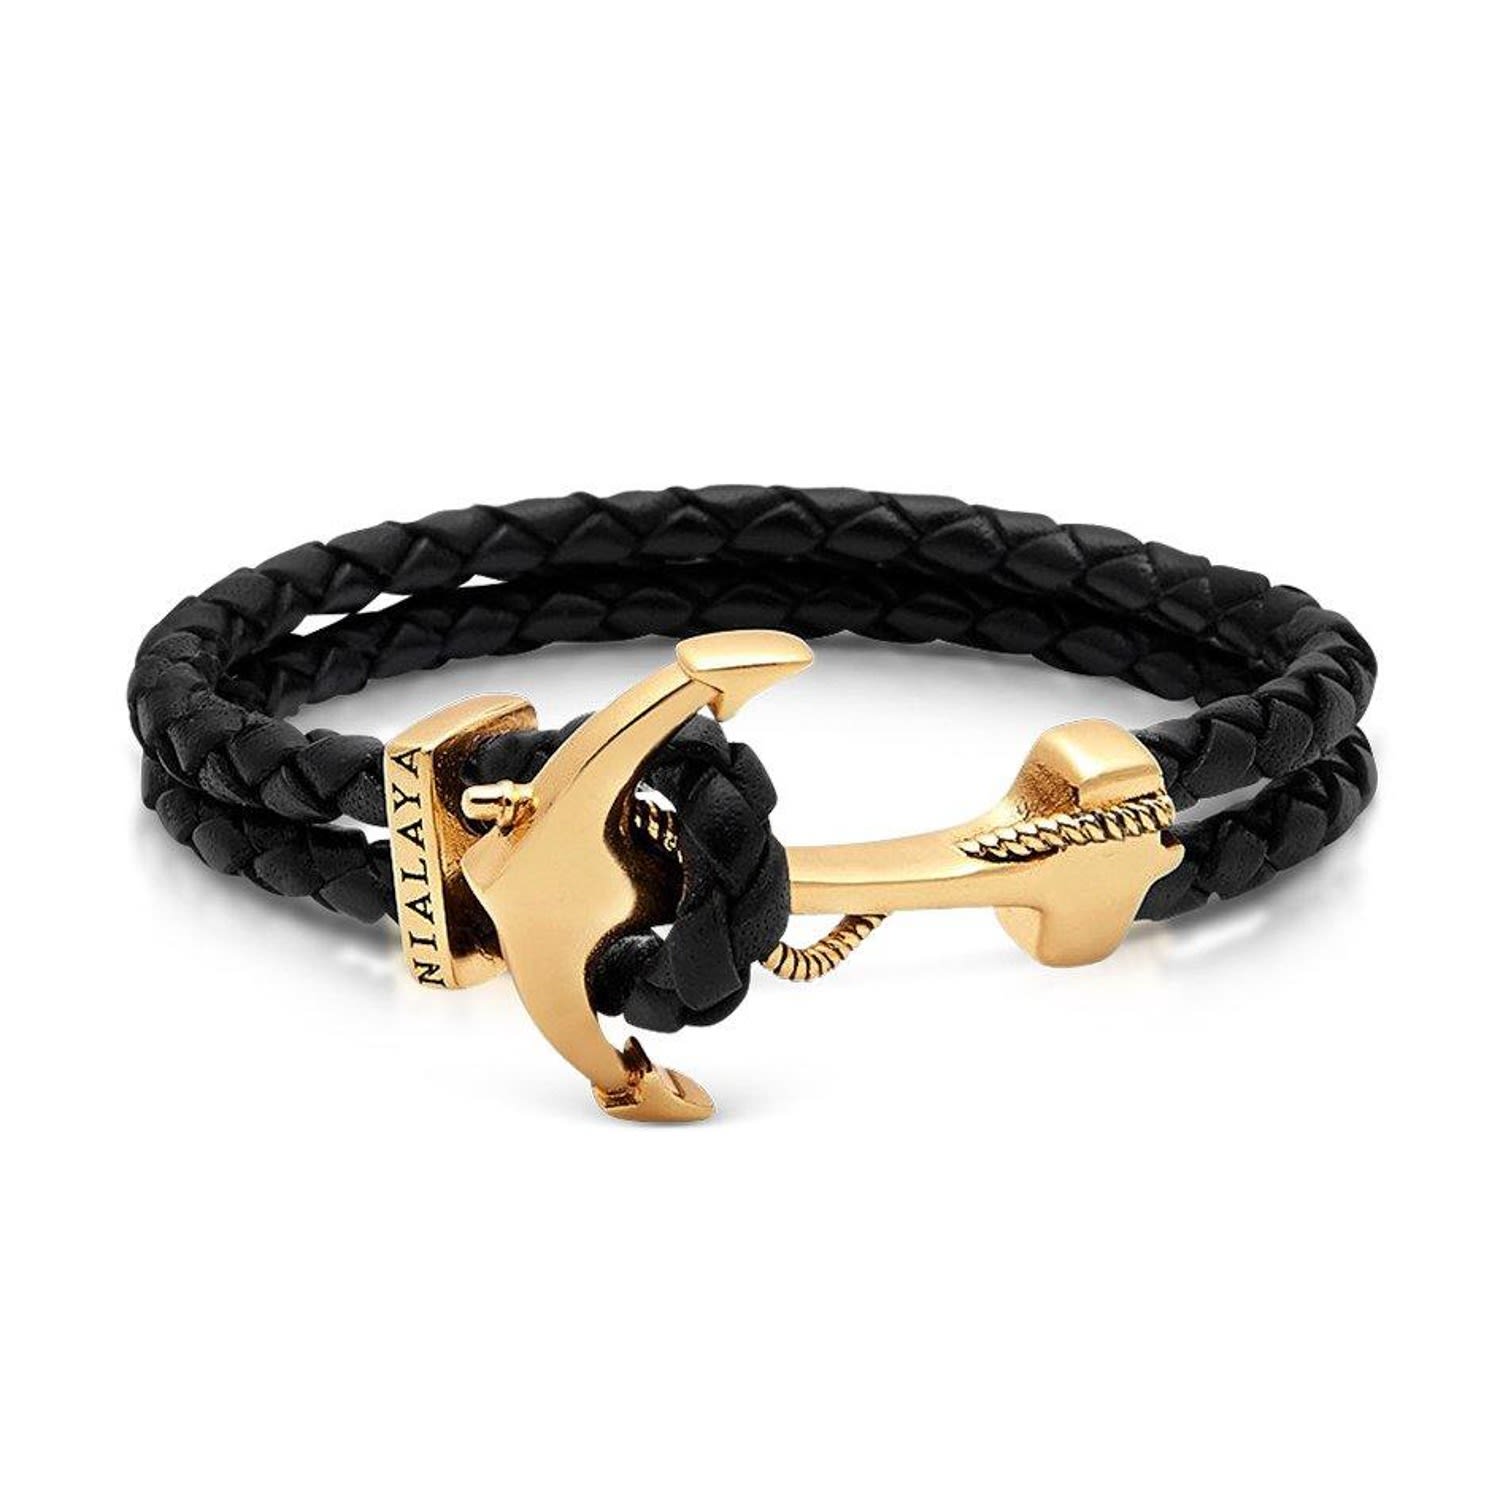 Gold / Black Men's Black Leather Bracelet With Gold Anchor Nialaya Jewelry